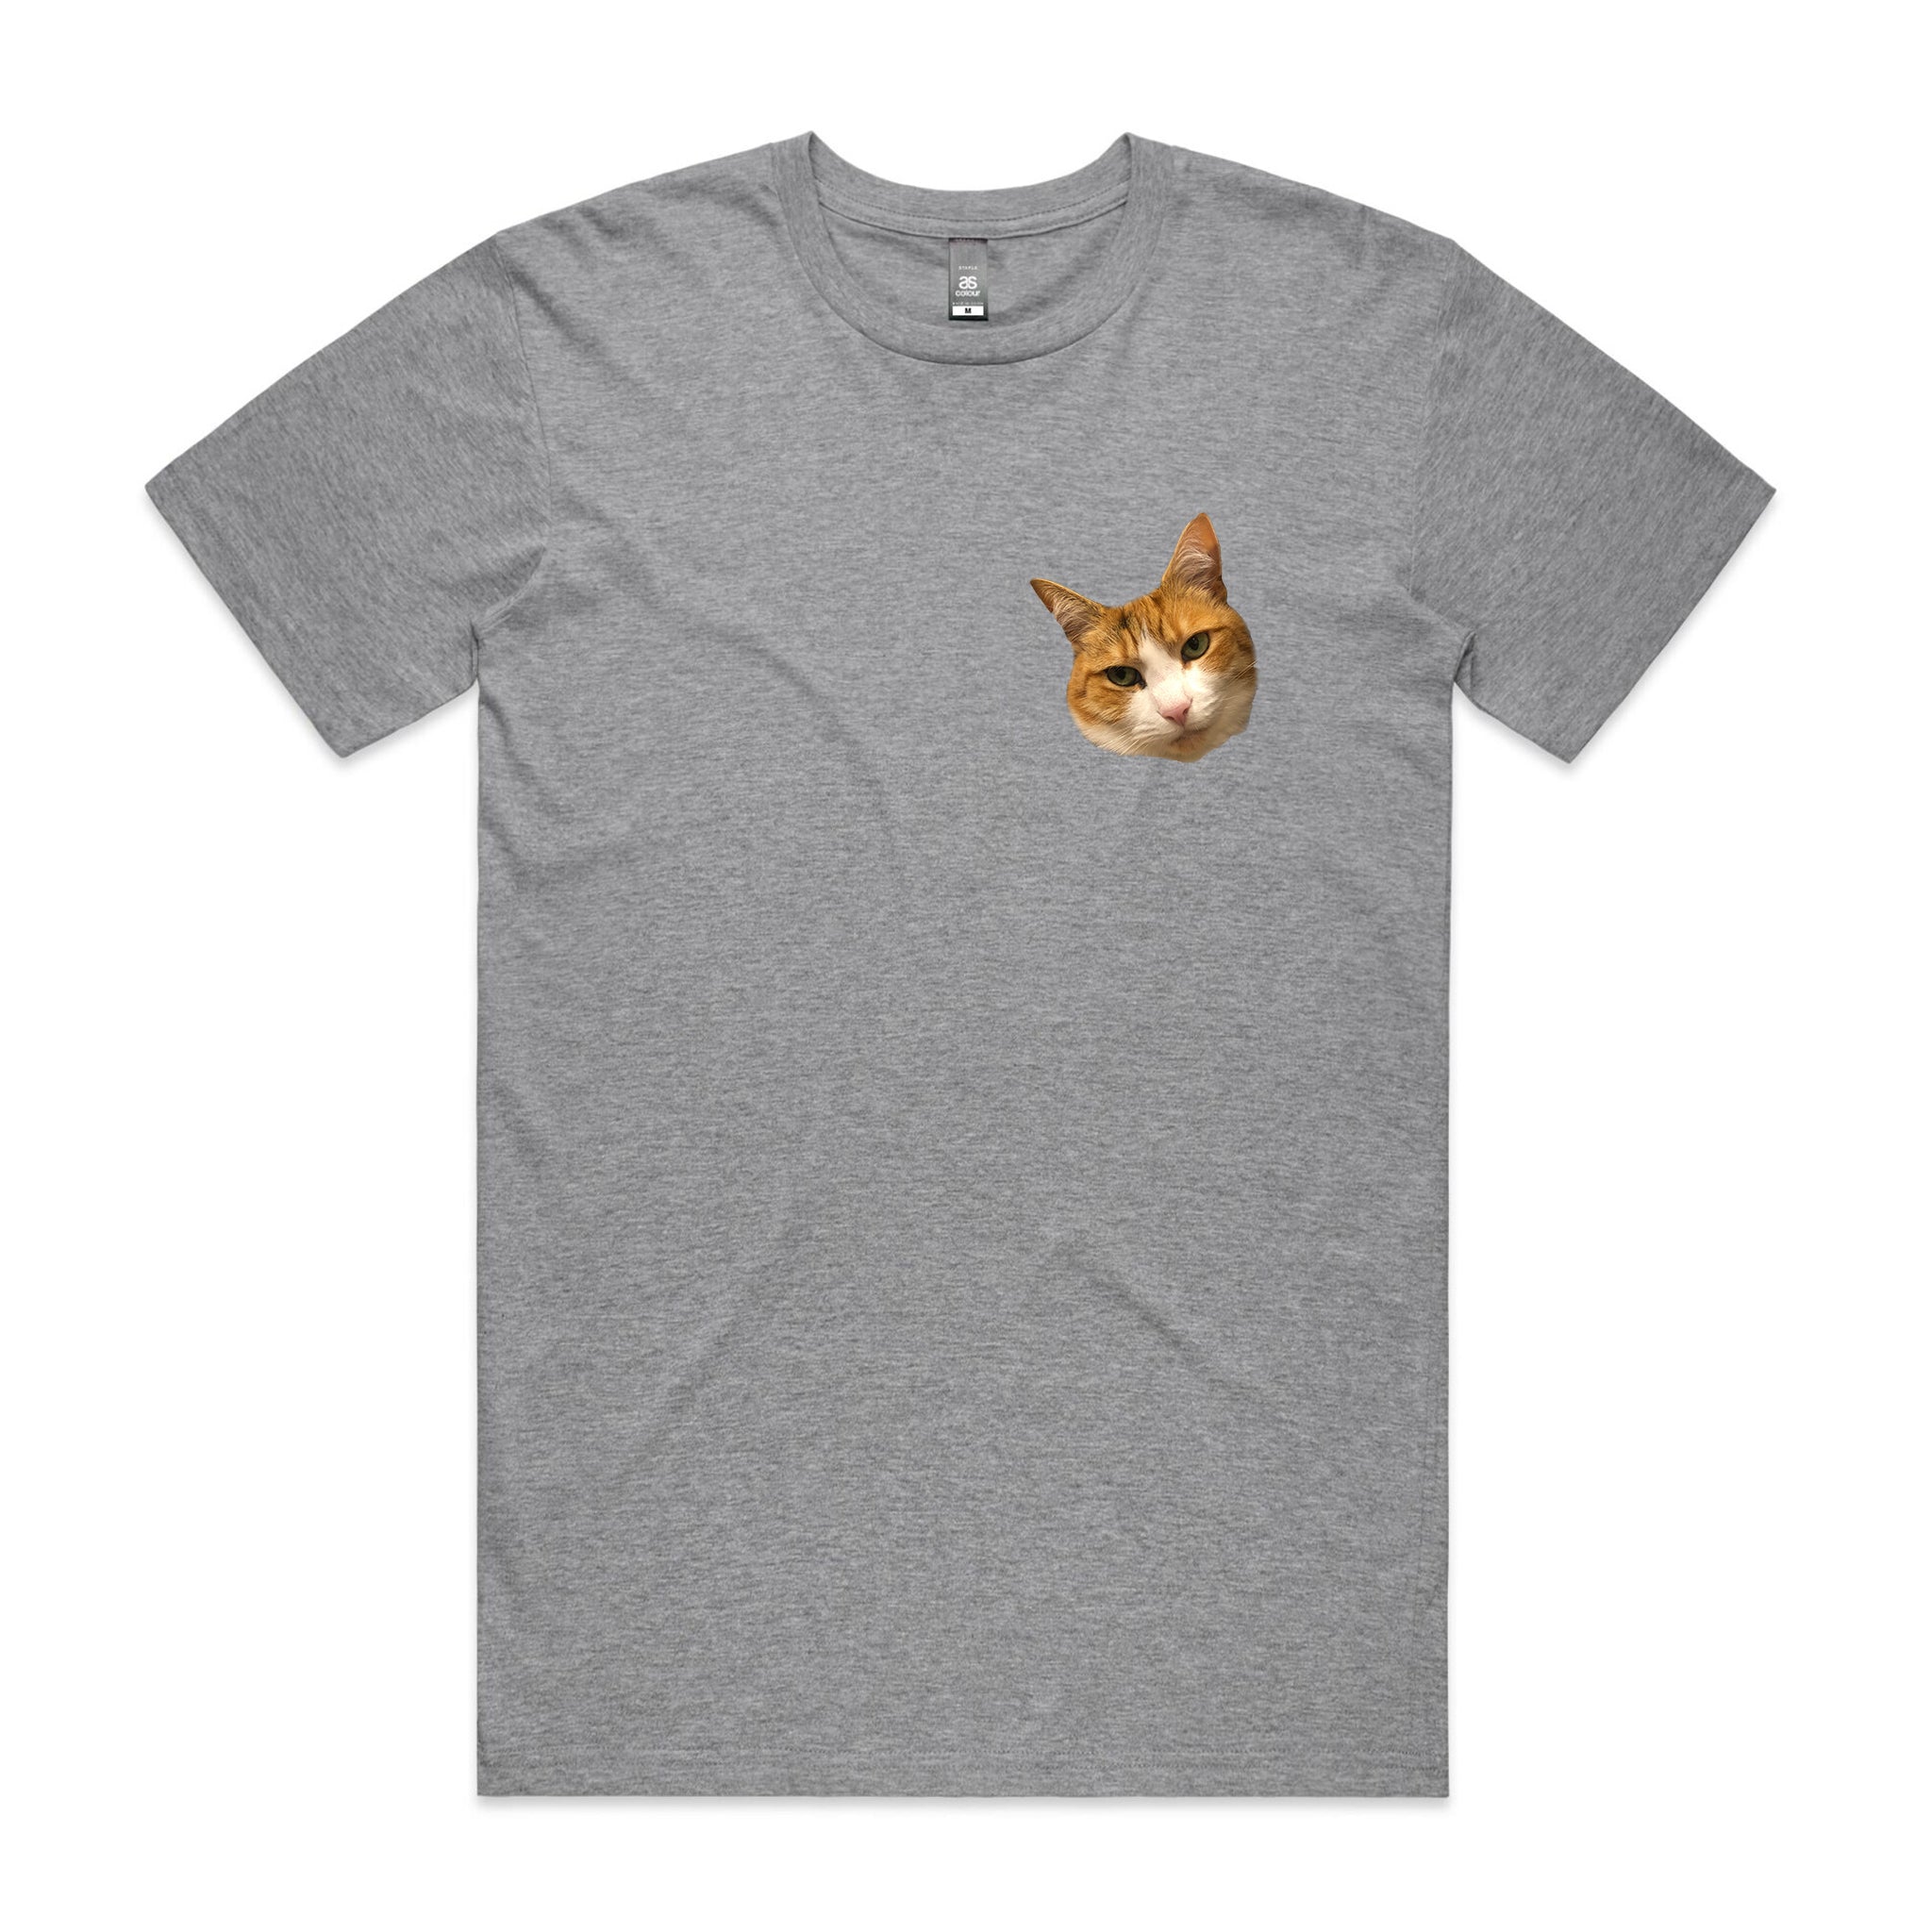 Create Your Own Pet Tee